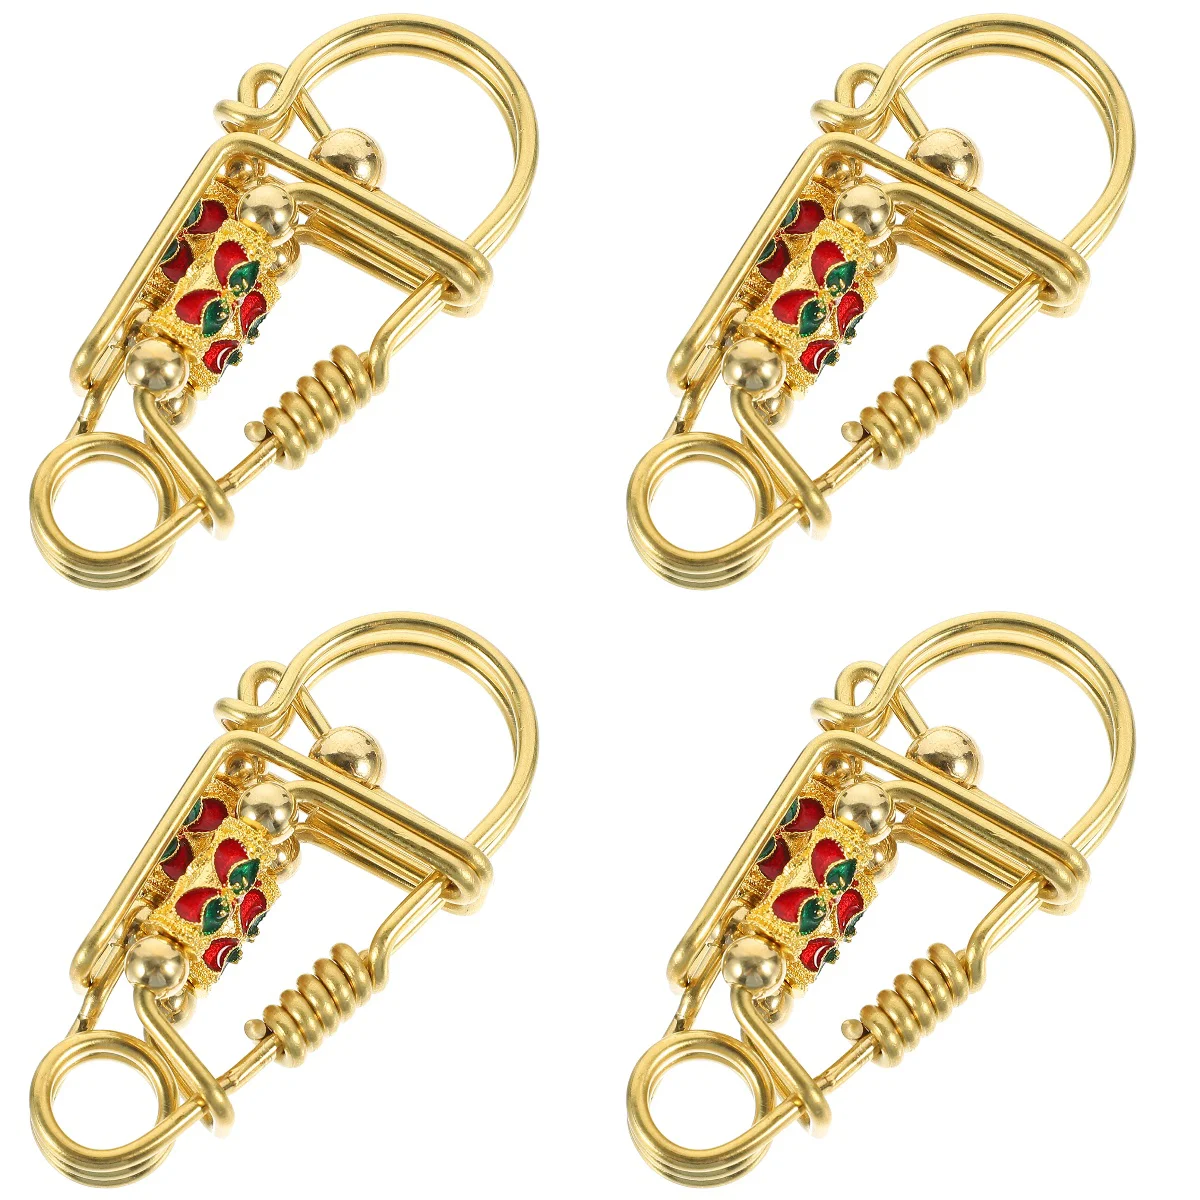 

Set of 4 Key Chain Car Fob Keychain for Men Outdoor Carabiner Keychains Decorate